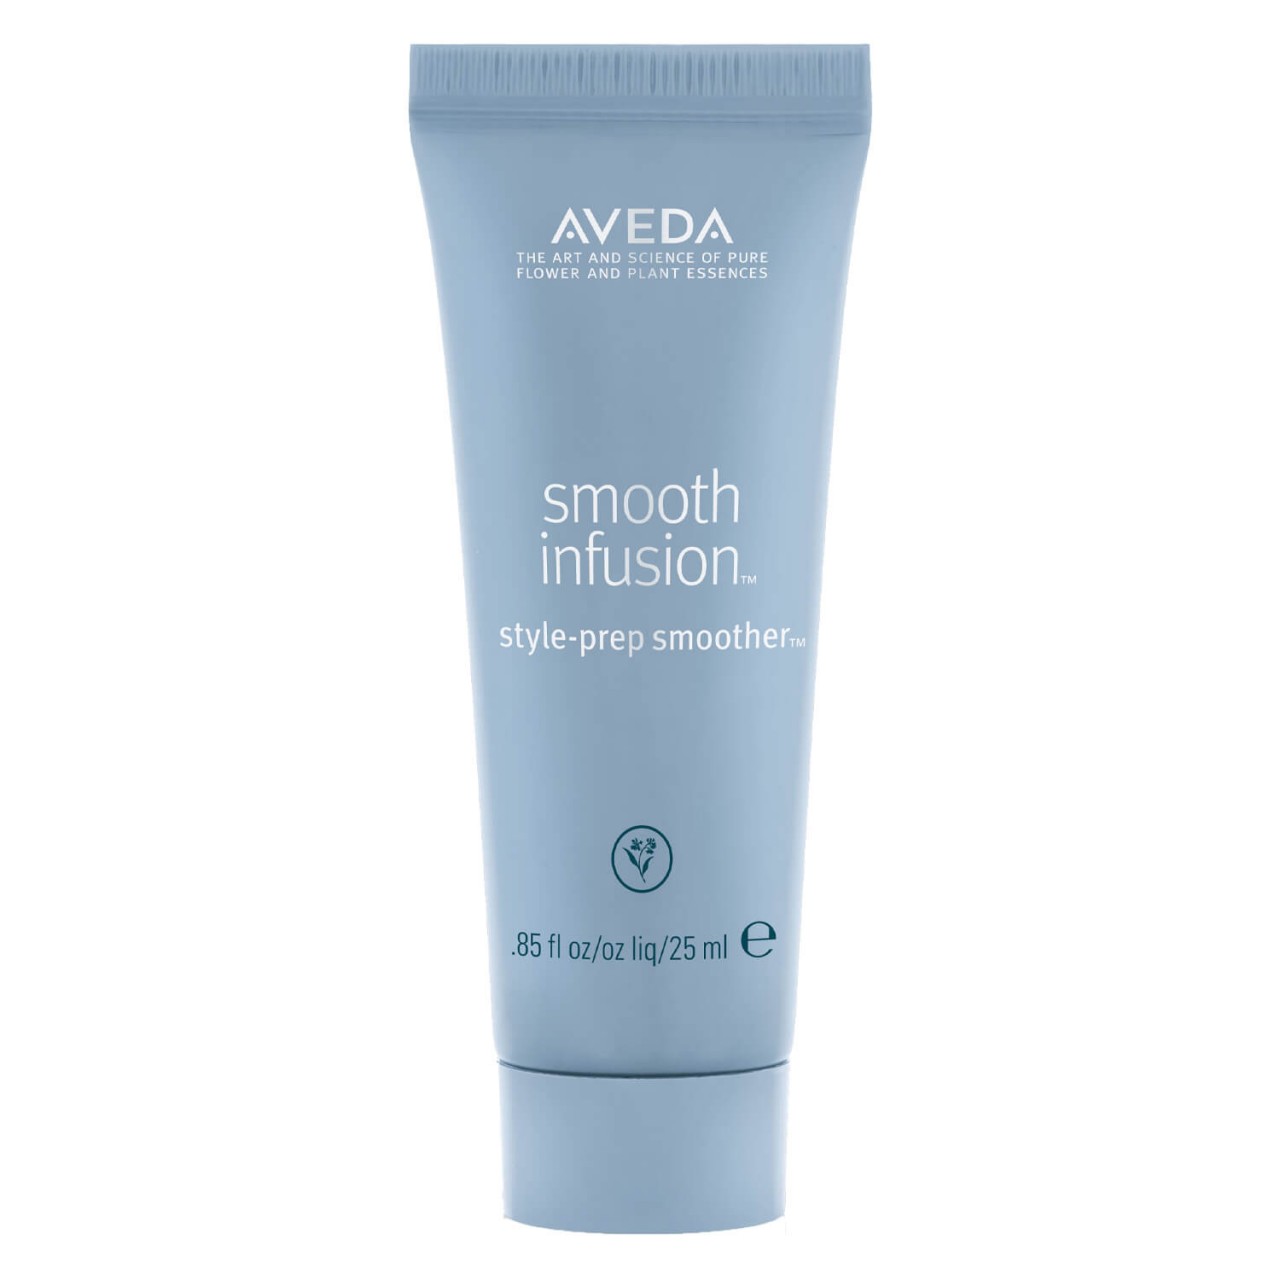 smooth infusion - style-prep smoother von Aveda